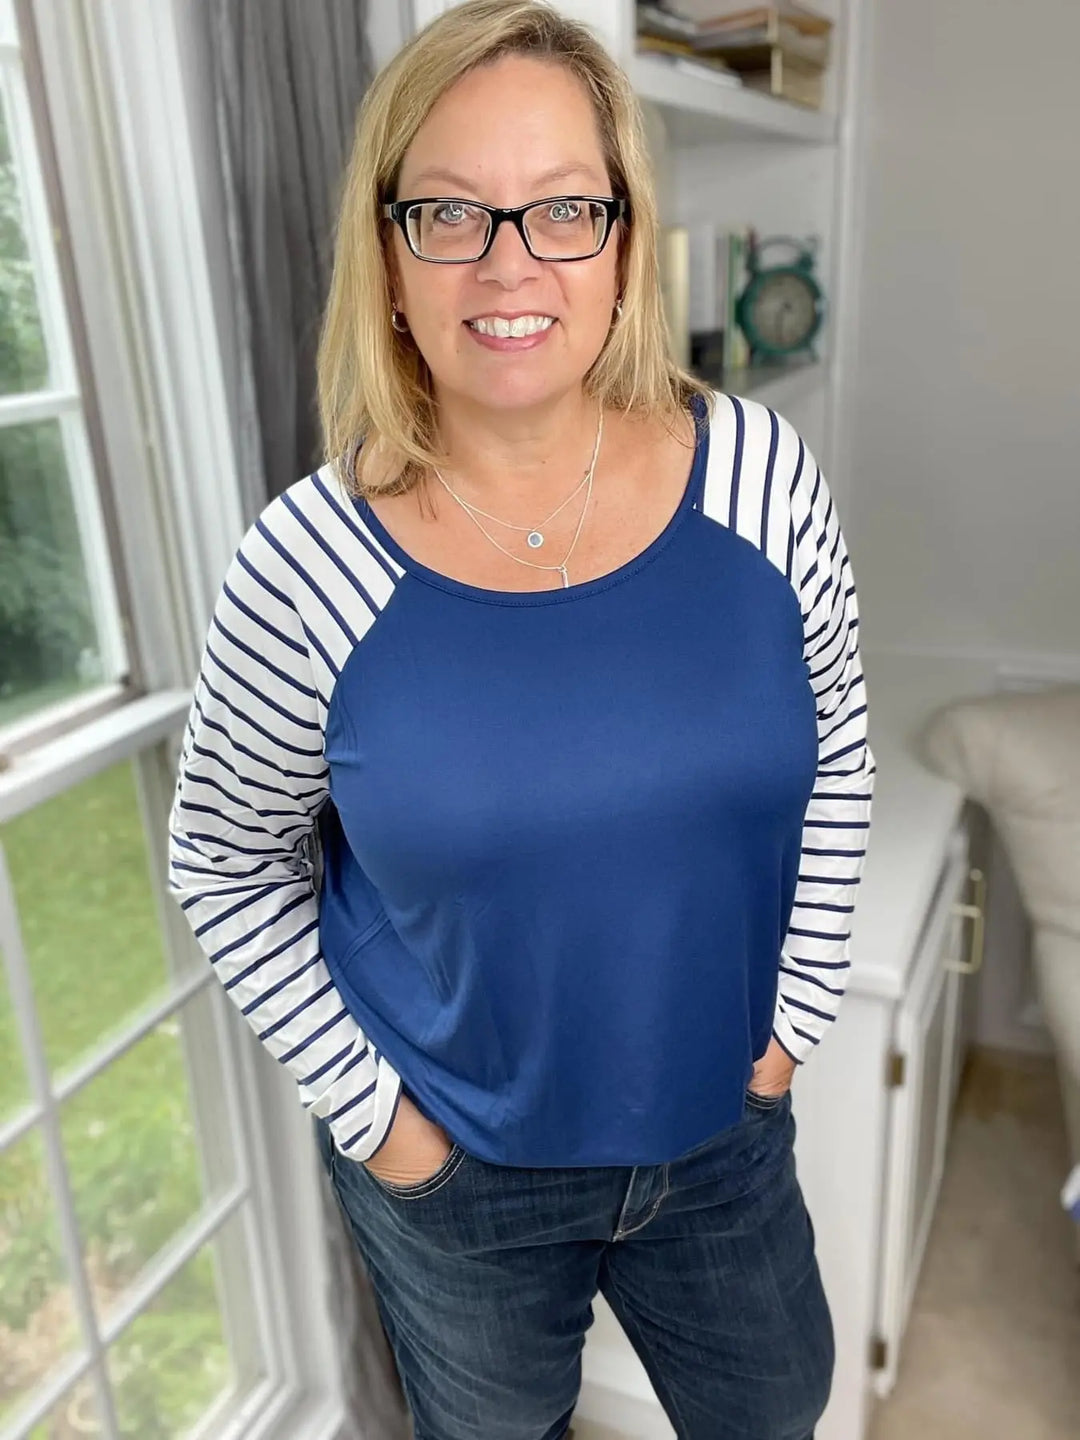 Plus Blue Striped-Sleeve Raglan Top-Styled by Steph-Styled by Steph-Women's Fashion Clothing Boutique, Indiana